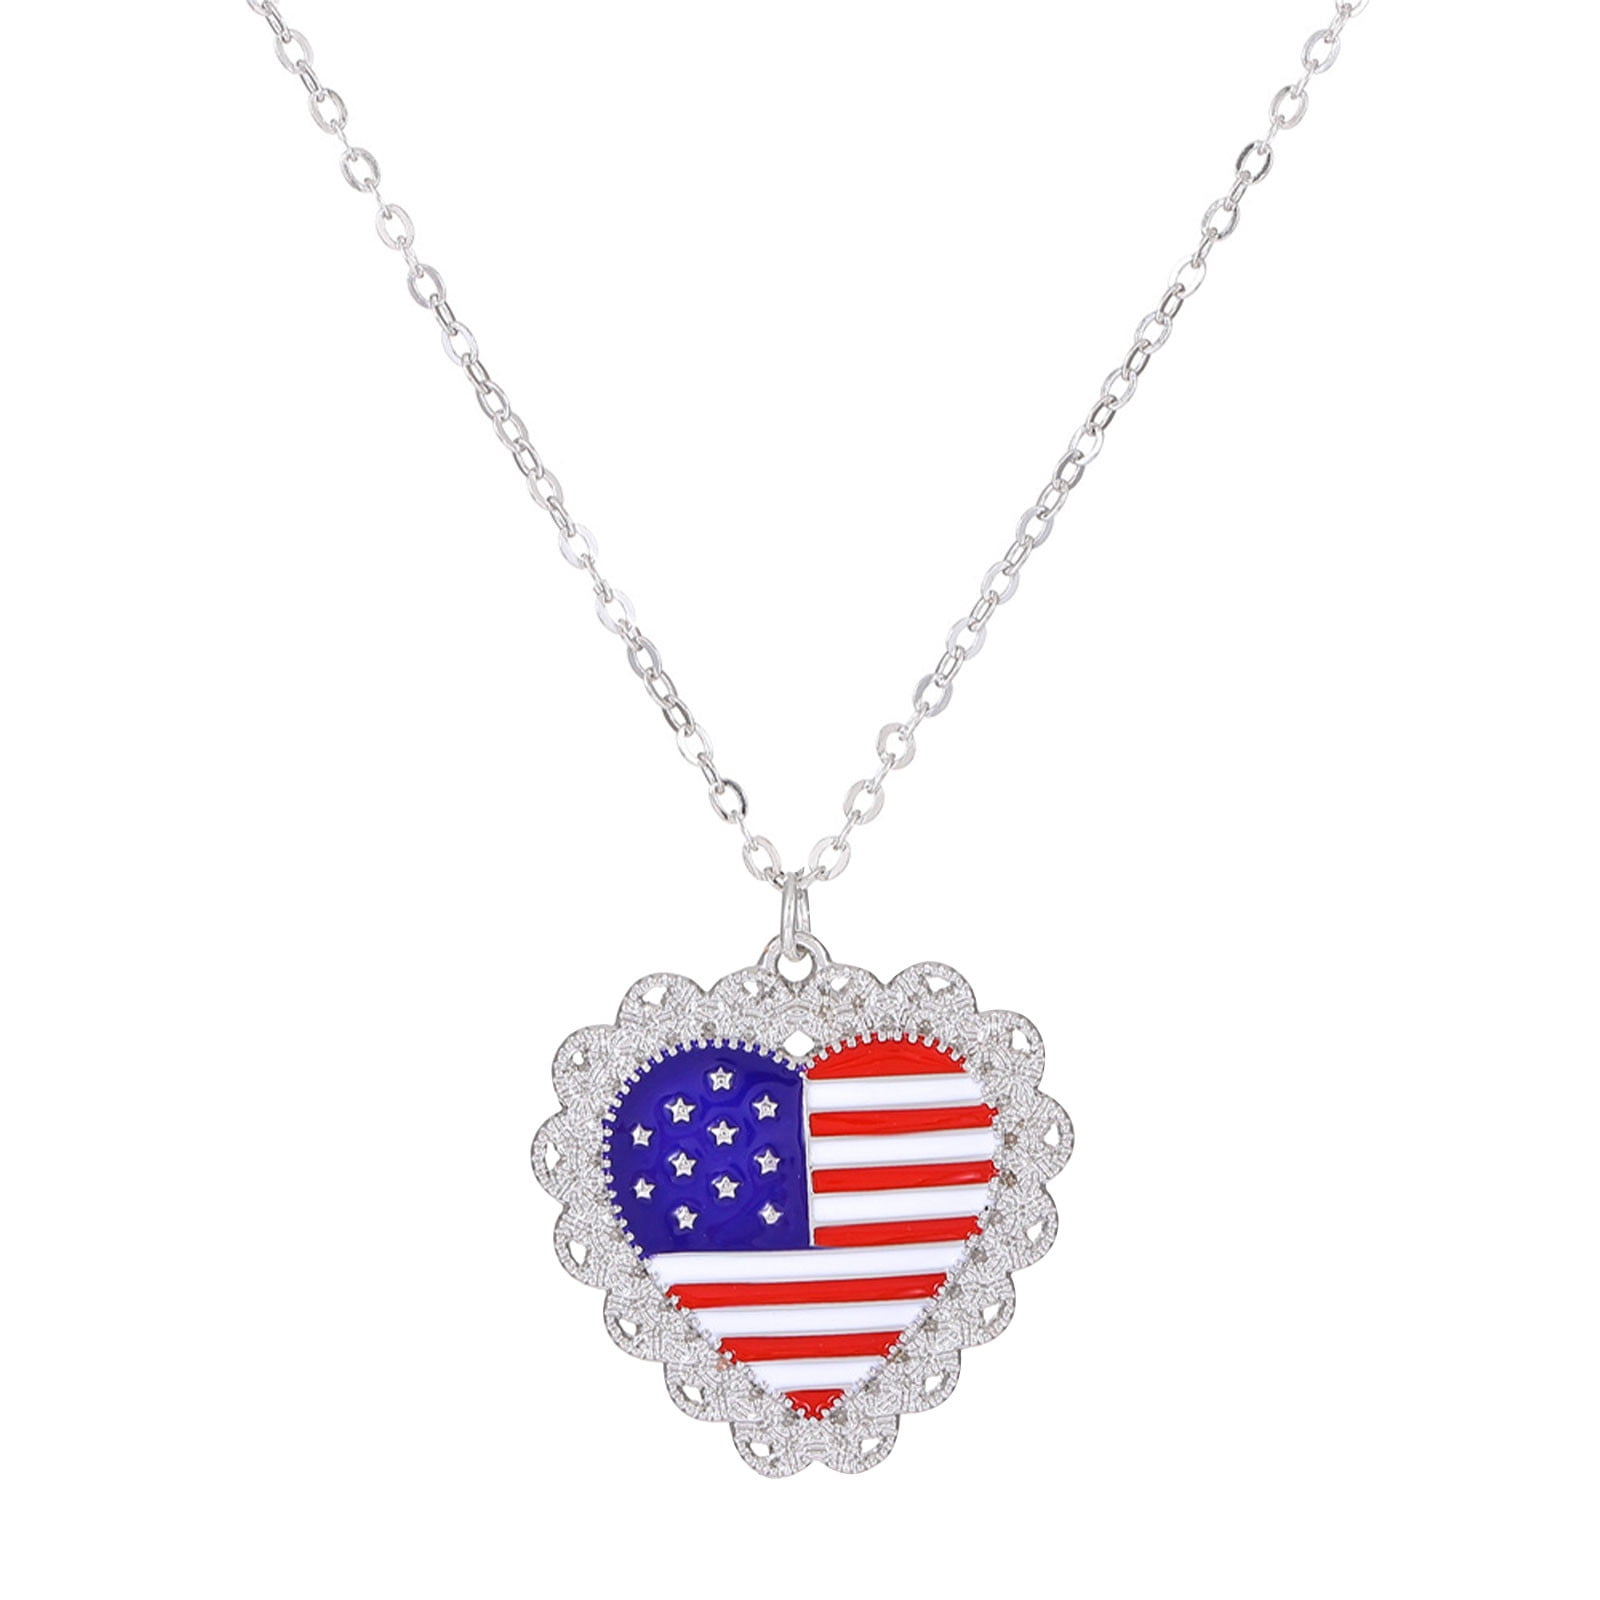 Midsumdr 4th of July Necklaces for Women Patriotic American Flag Heart Shape Necklace Red White and Blue Necklace Memorial Day Gift Jewelry Accessory f5801886 fb65 46b8 9968 6aa2422b9a14.11e1f84b8497948735b62f40e9aa69ee